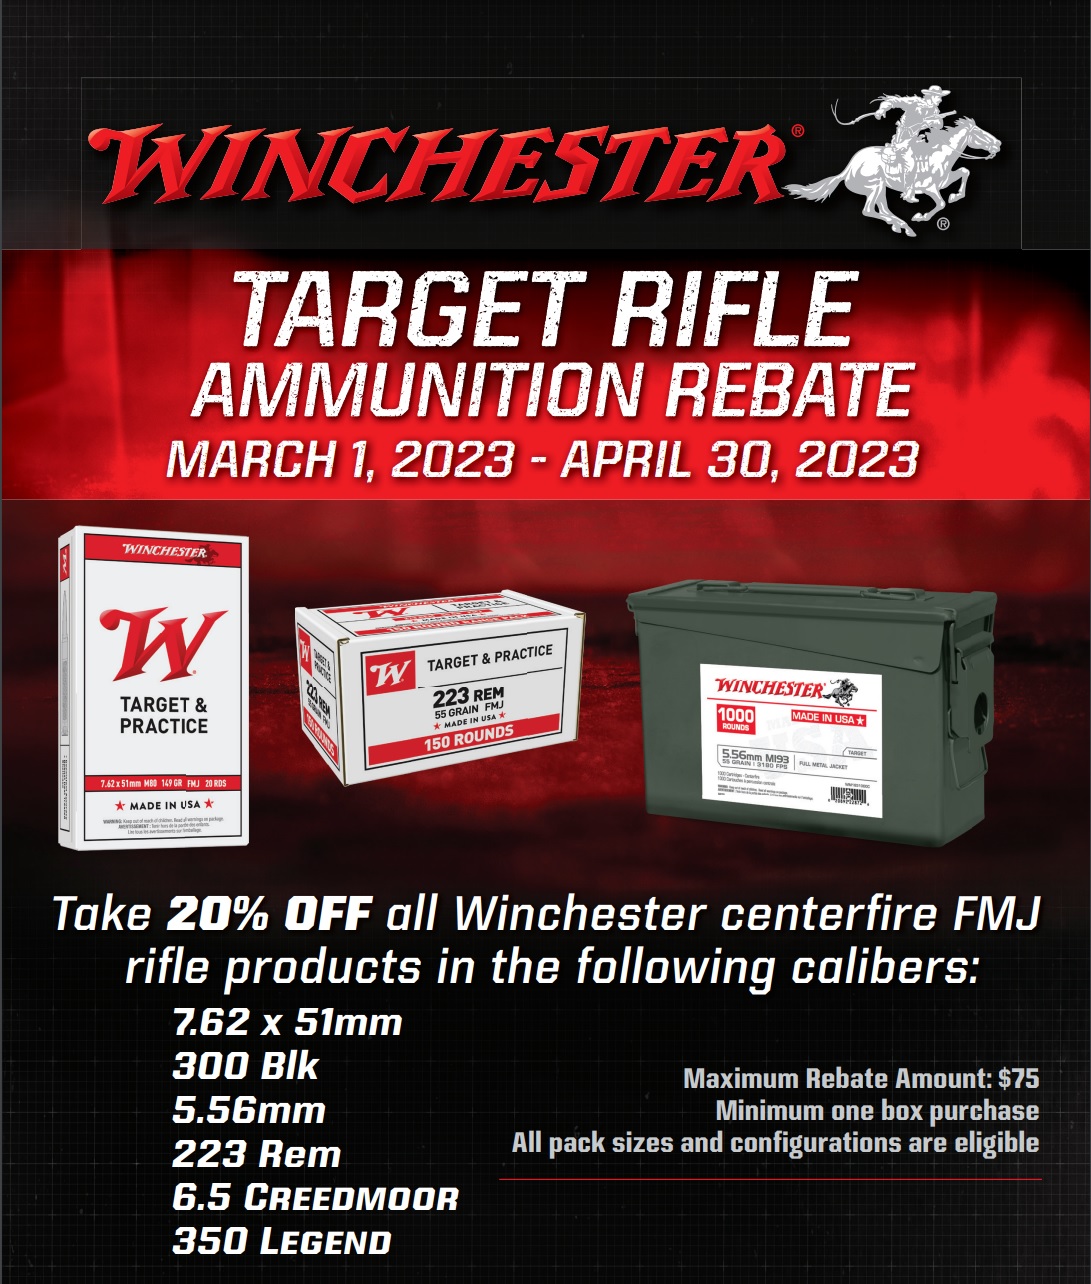 Mail In Rebate For Black Pack Ammo